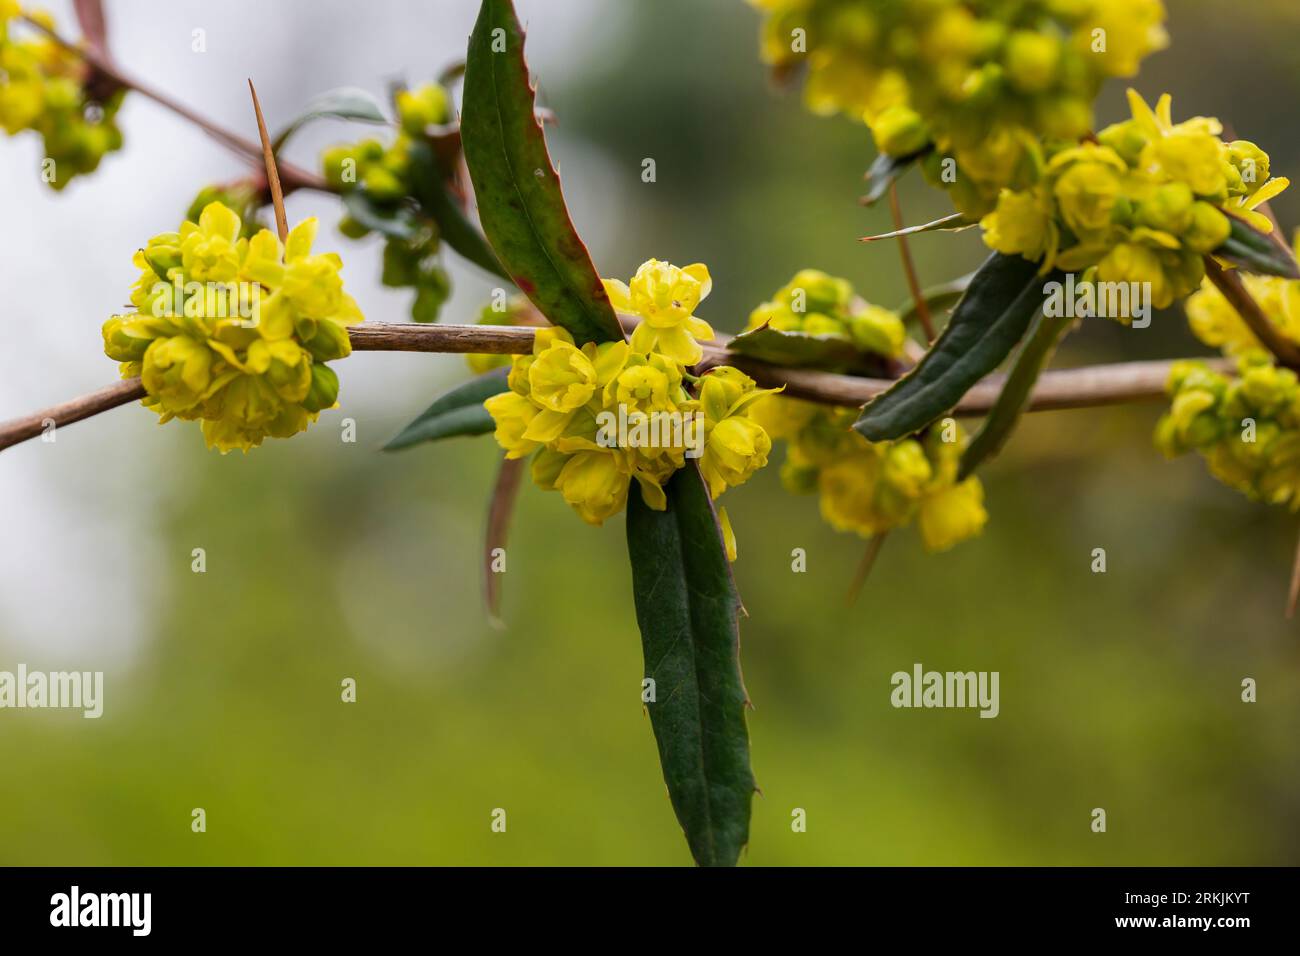 Flowering bush of barberry Berberis soulieana in Southern Cultures Arboretum. Narrow evergreen leaves and yellow flowers. Close-up. Spring. Sirius (Ad Stock Photo